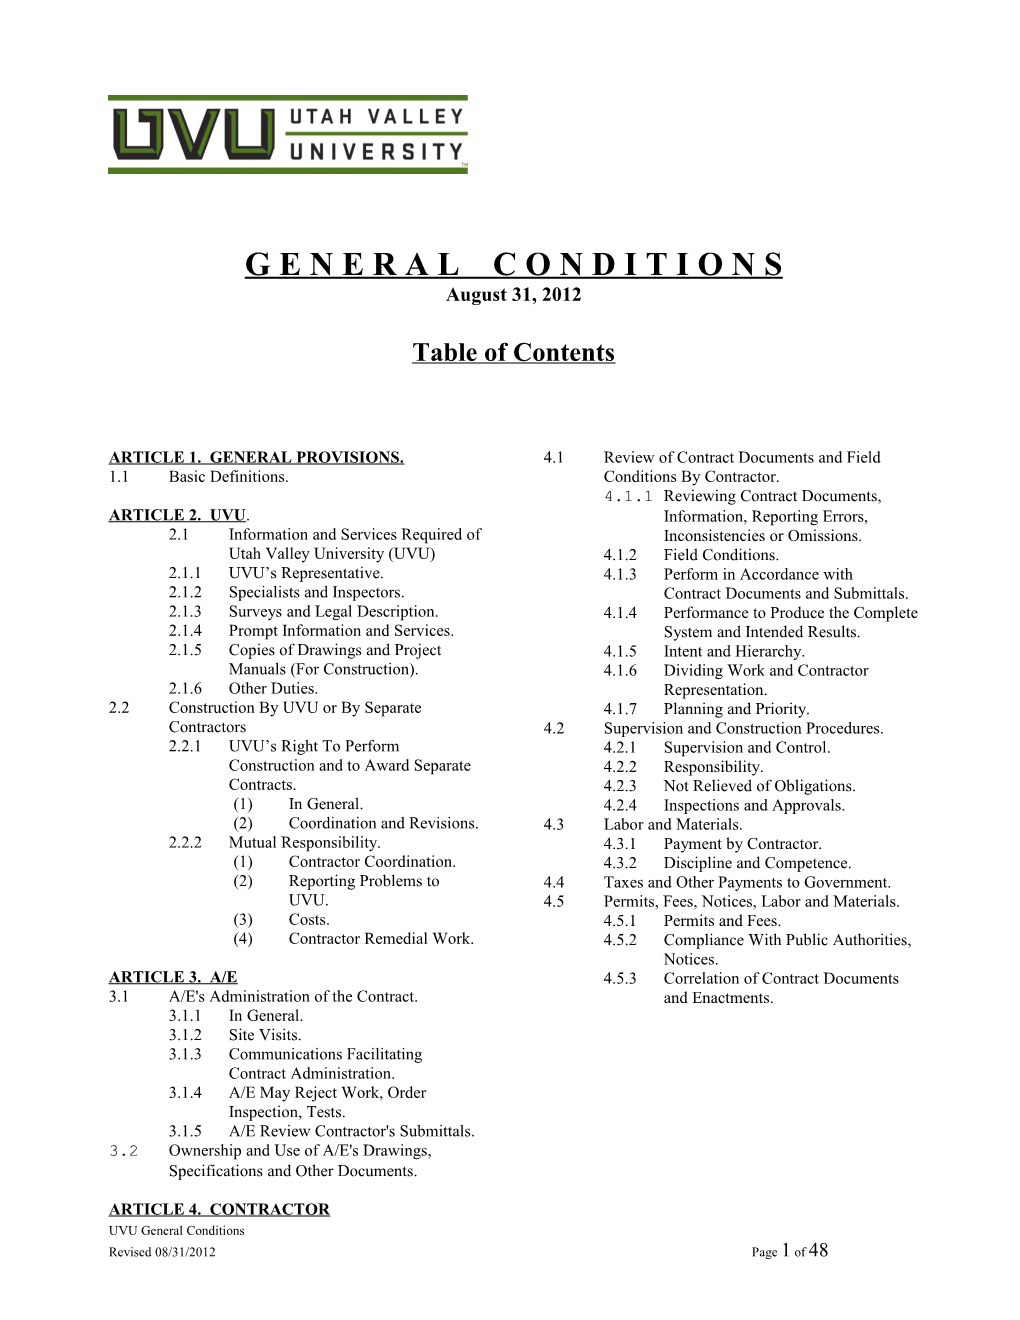 Table of Contents s297